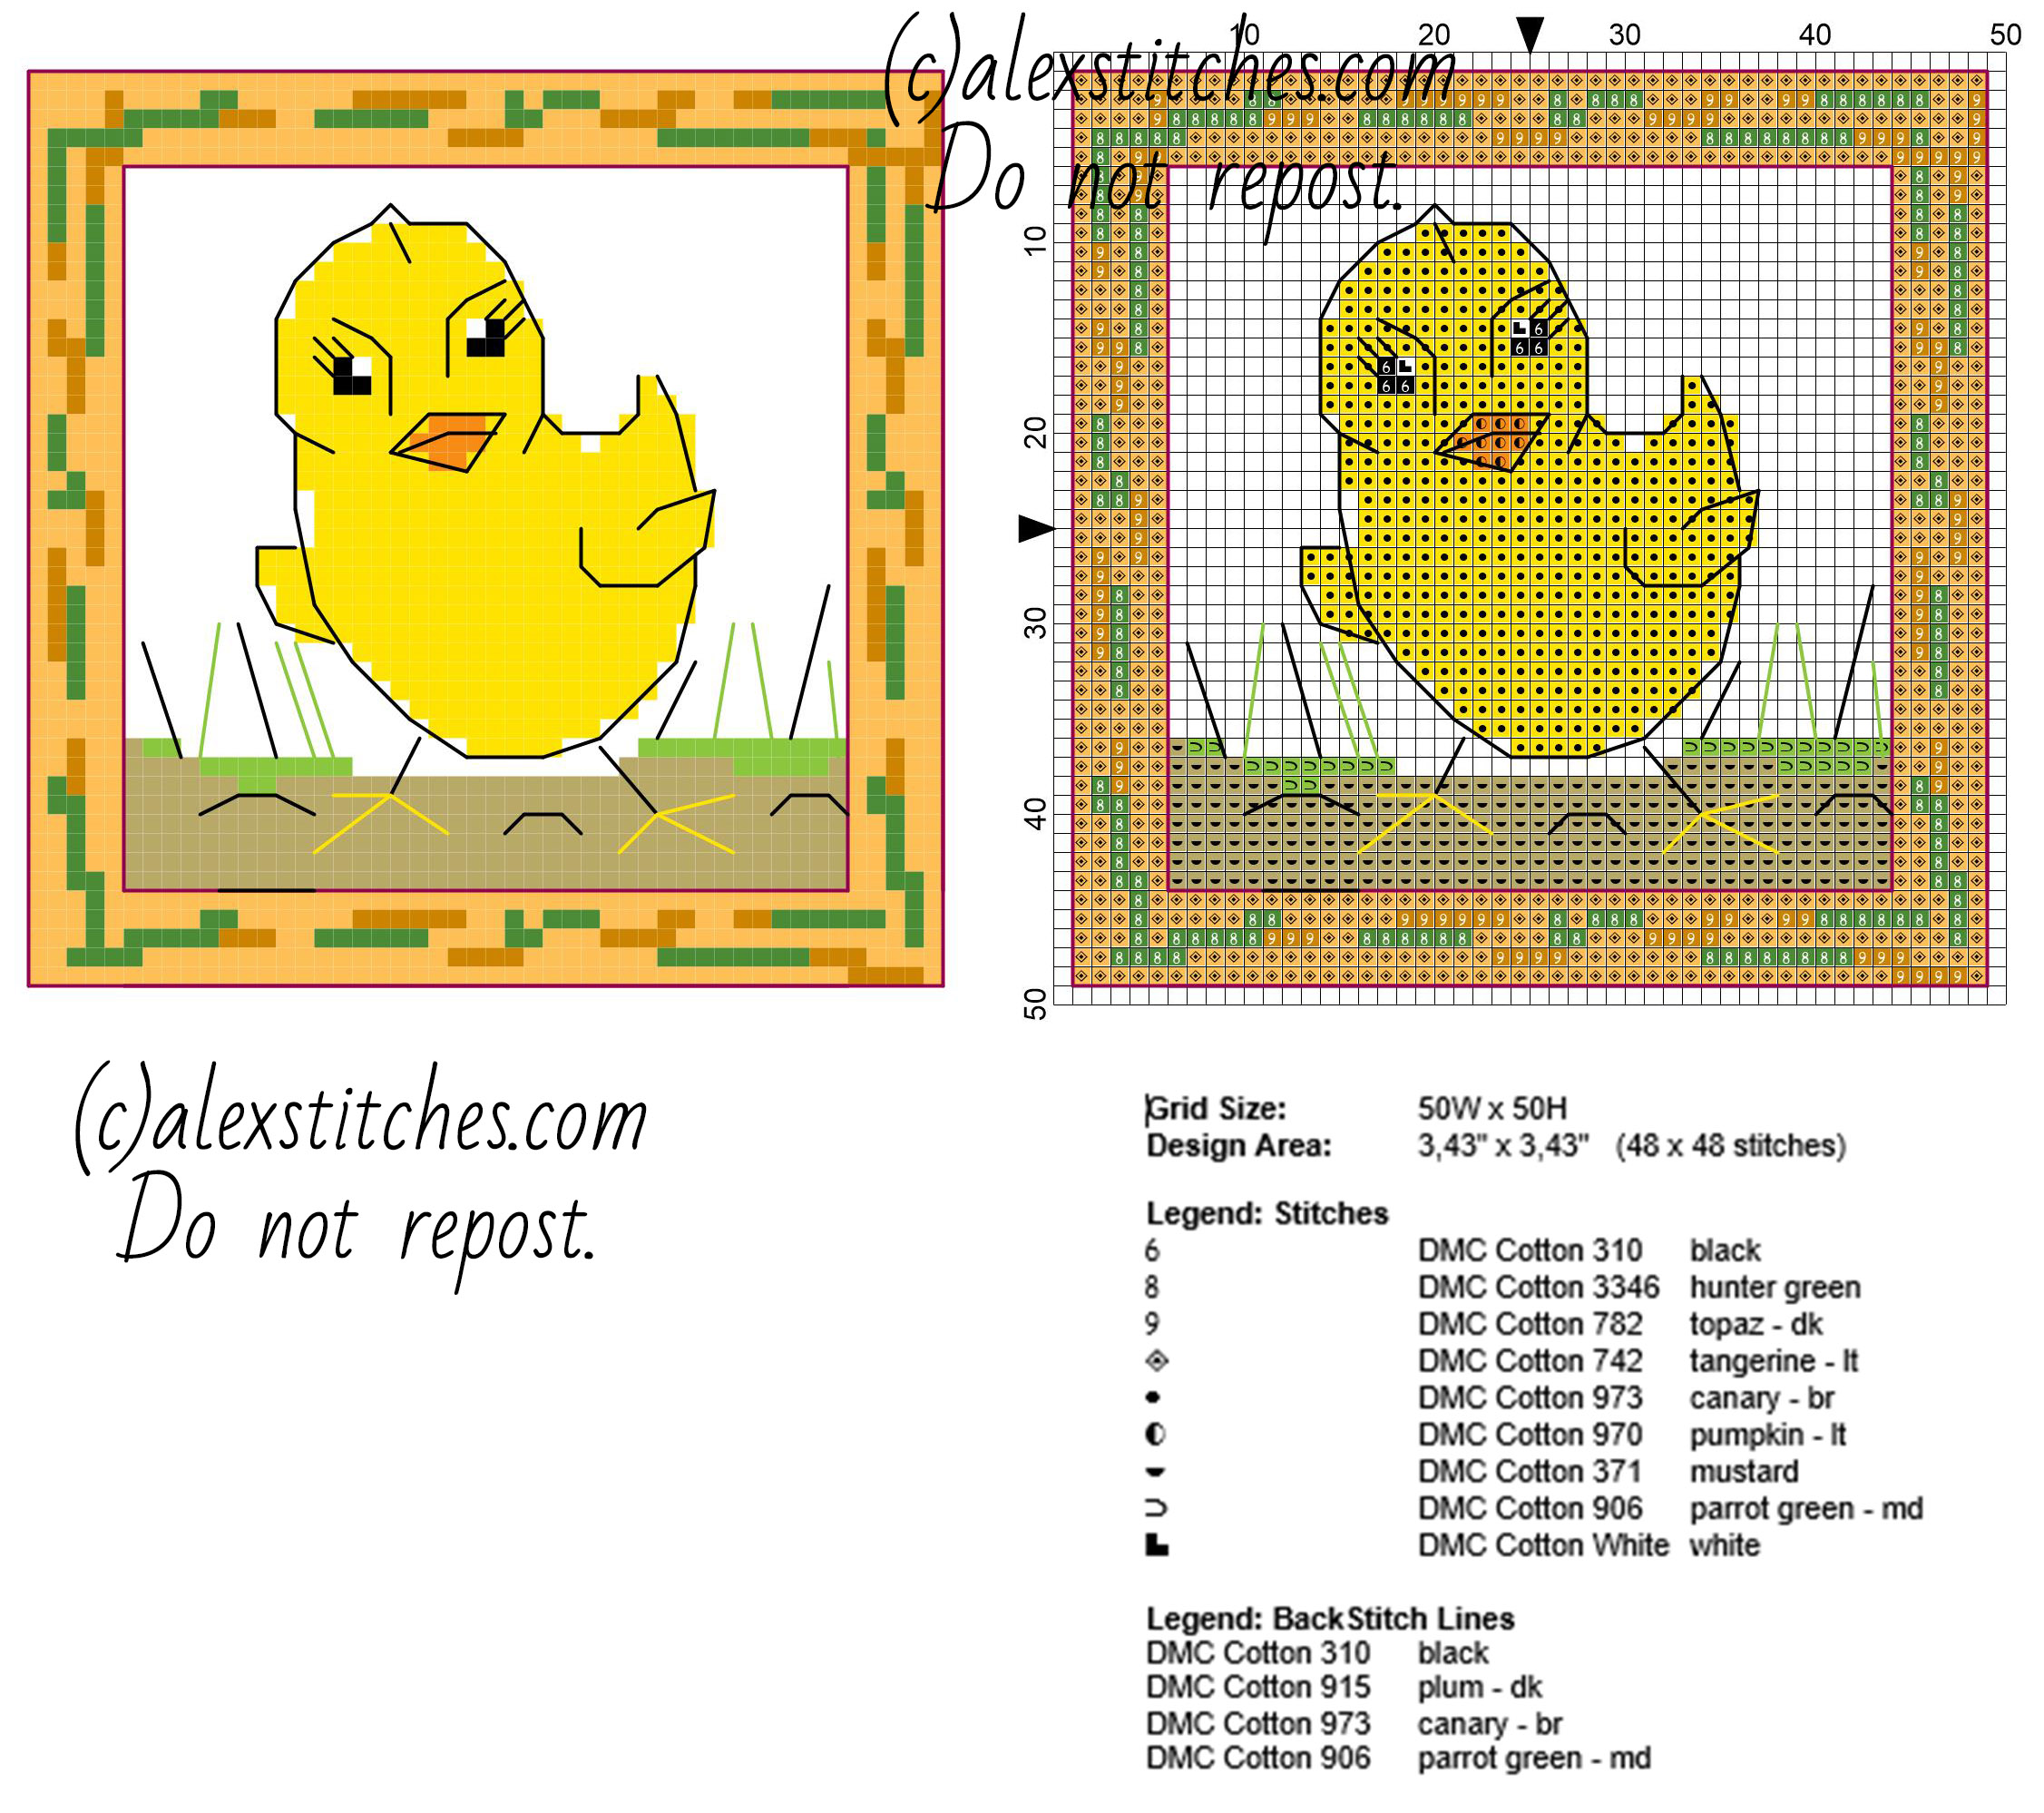 Easter card with chick size 50 x 50 stitches free cross stitch patterns pcstitch